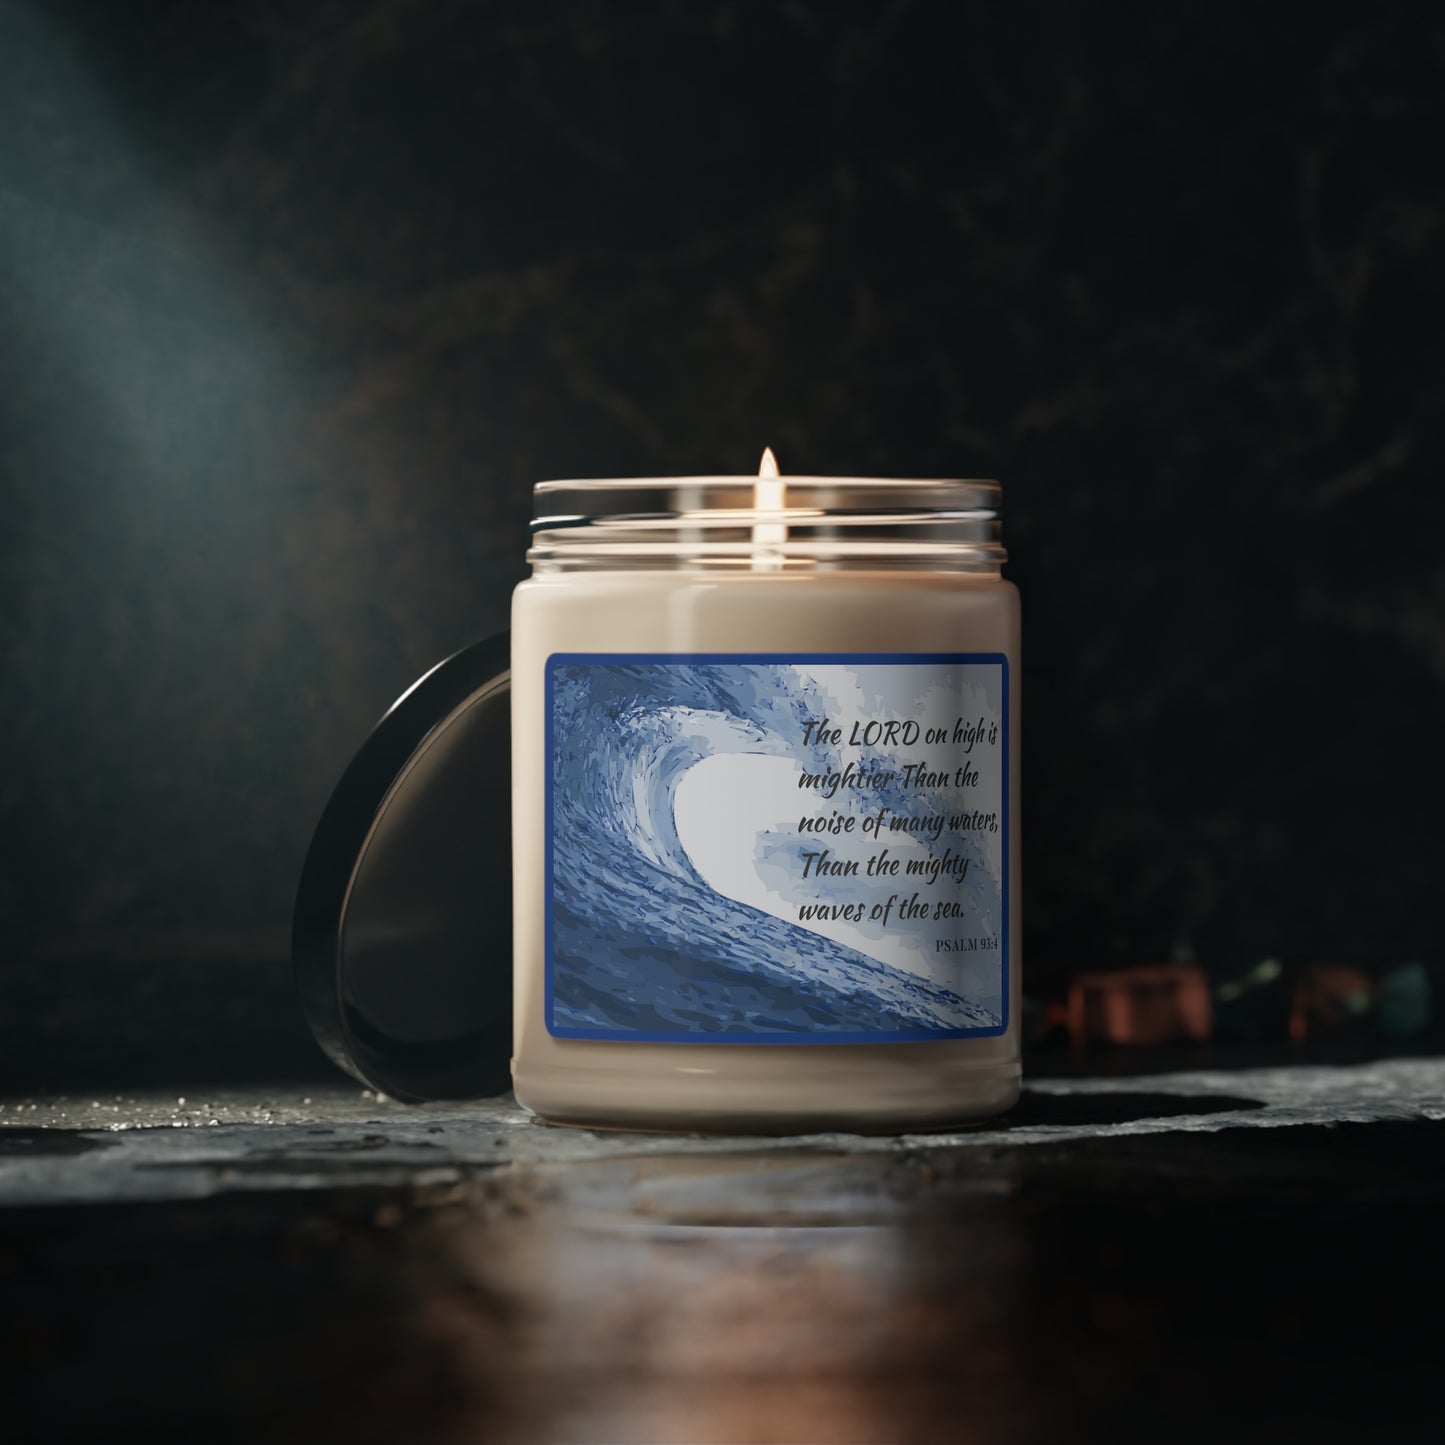 Mightier Than The Waves Sea Salt Aromatherapy Soy Candle, 9oz